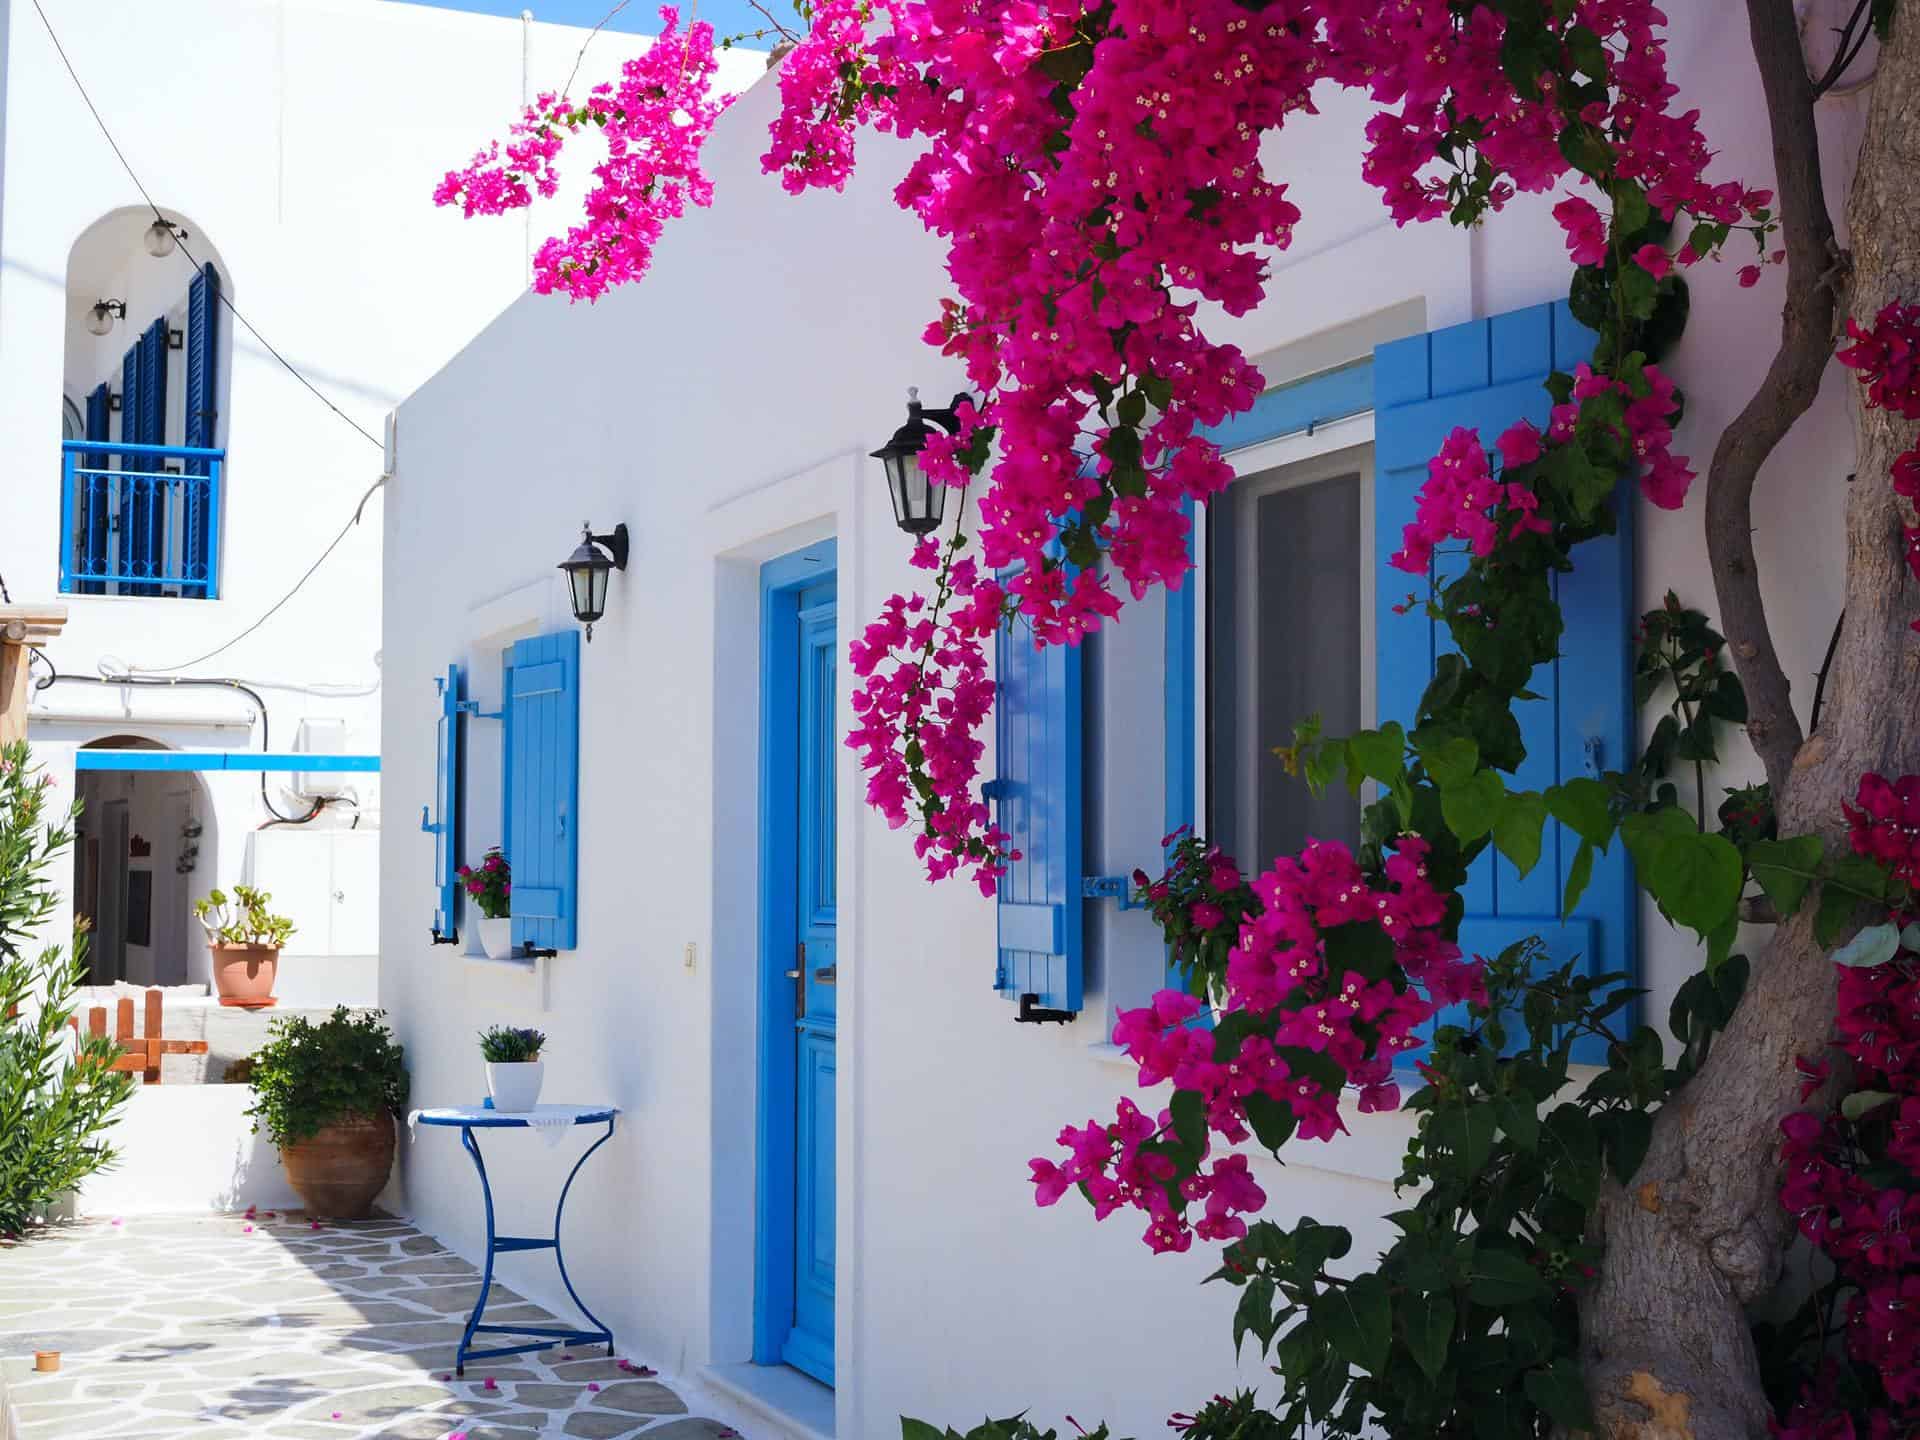 A white washed house in Greece